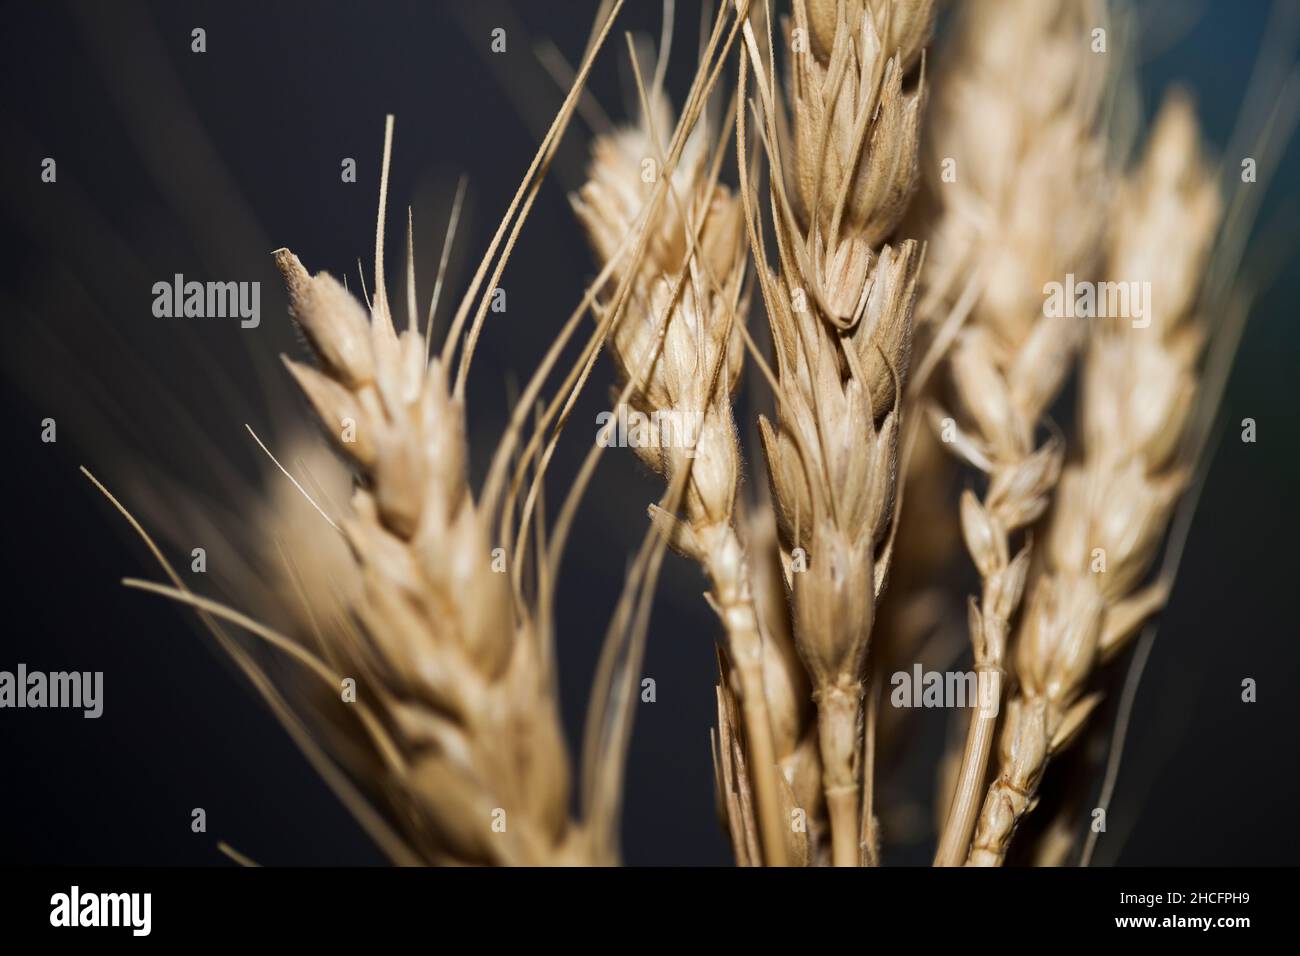 A close-up shot of golden reeds on a blurred background Stock Photo